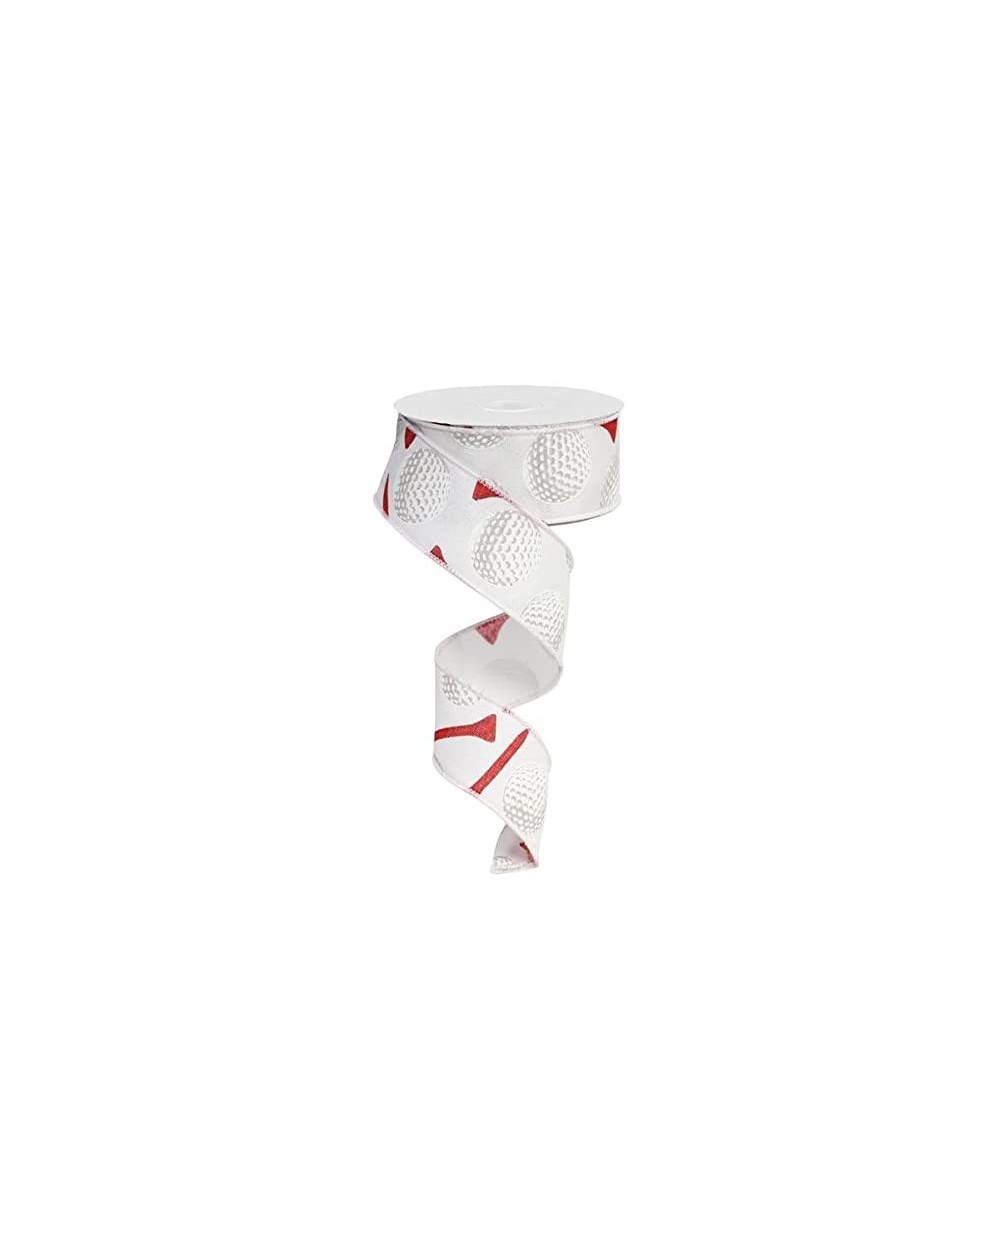 Bows & Ribbons Craig Bachman Imports- White/Red 1.5" x10yd Wired Golf Ball Ribbon - CI18EQCXSTS $22.69